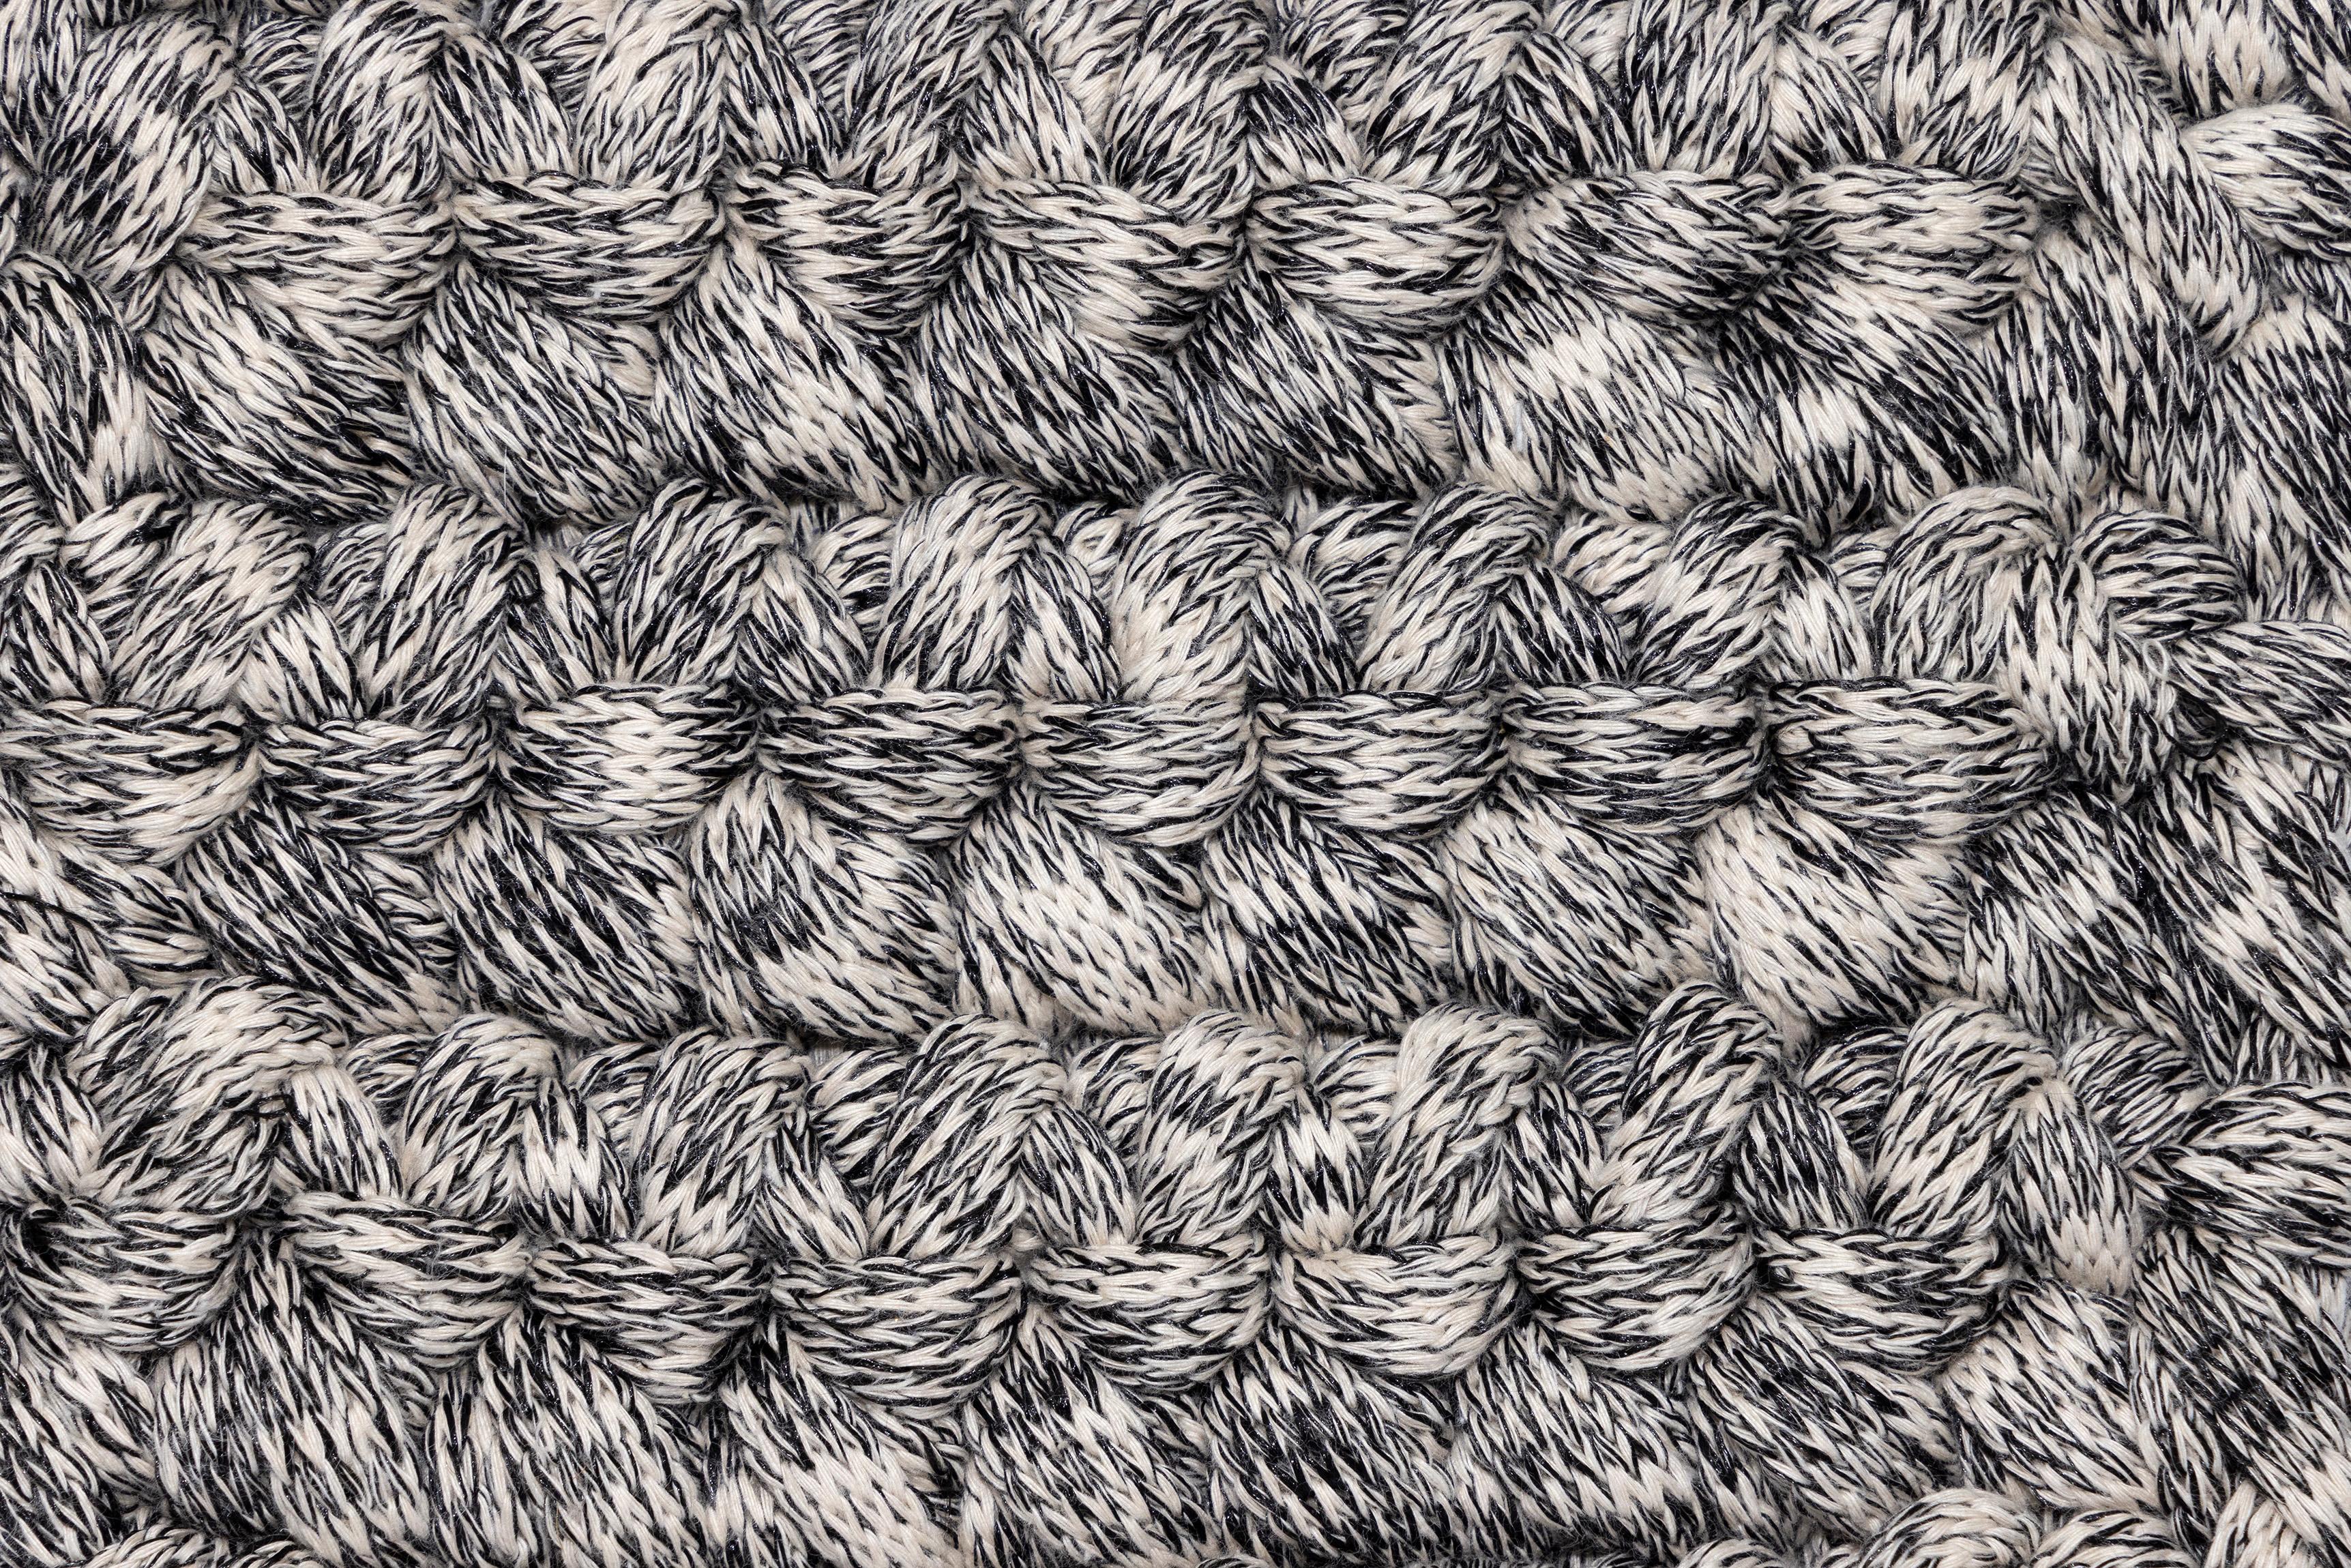 Hand-Crafted Handmade Crochet 200x300 cm Thick Rug in Grey Black Stone with tassels For Sale